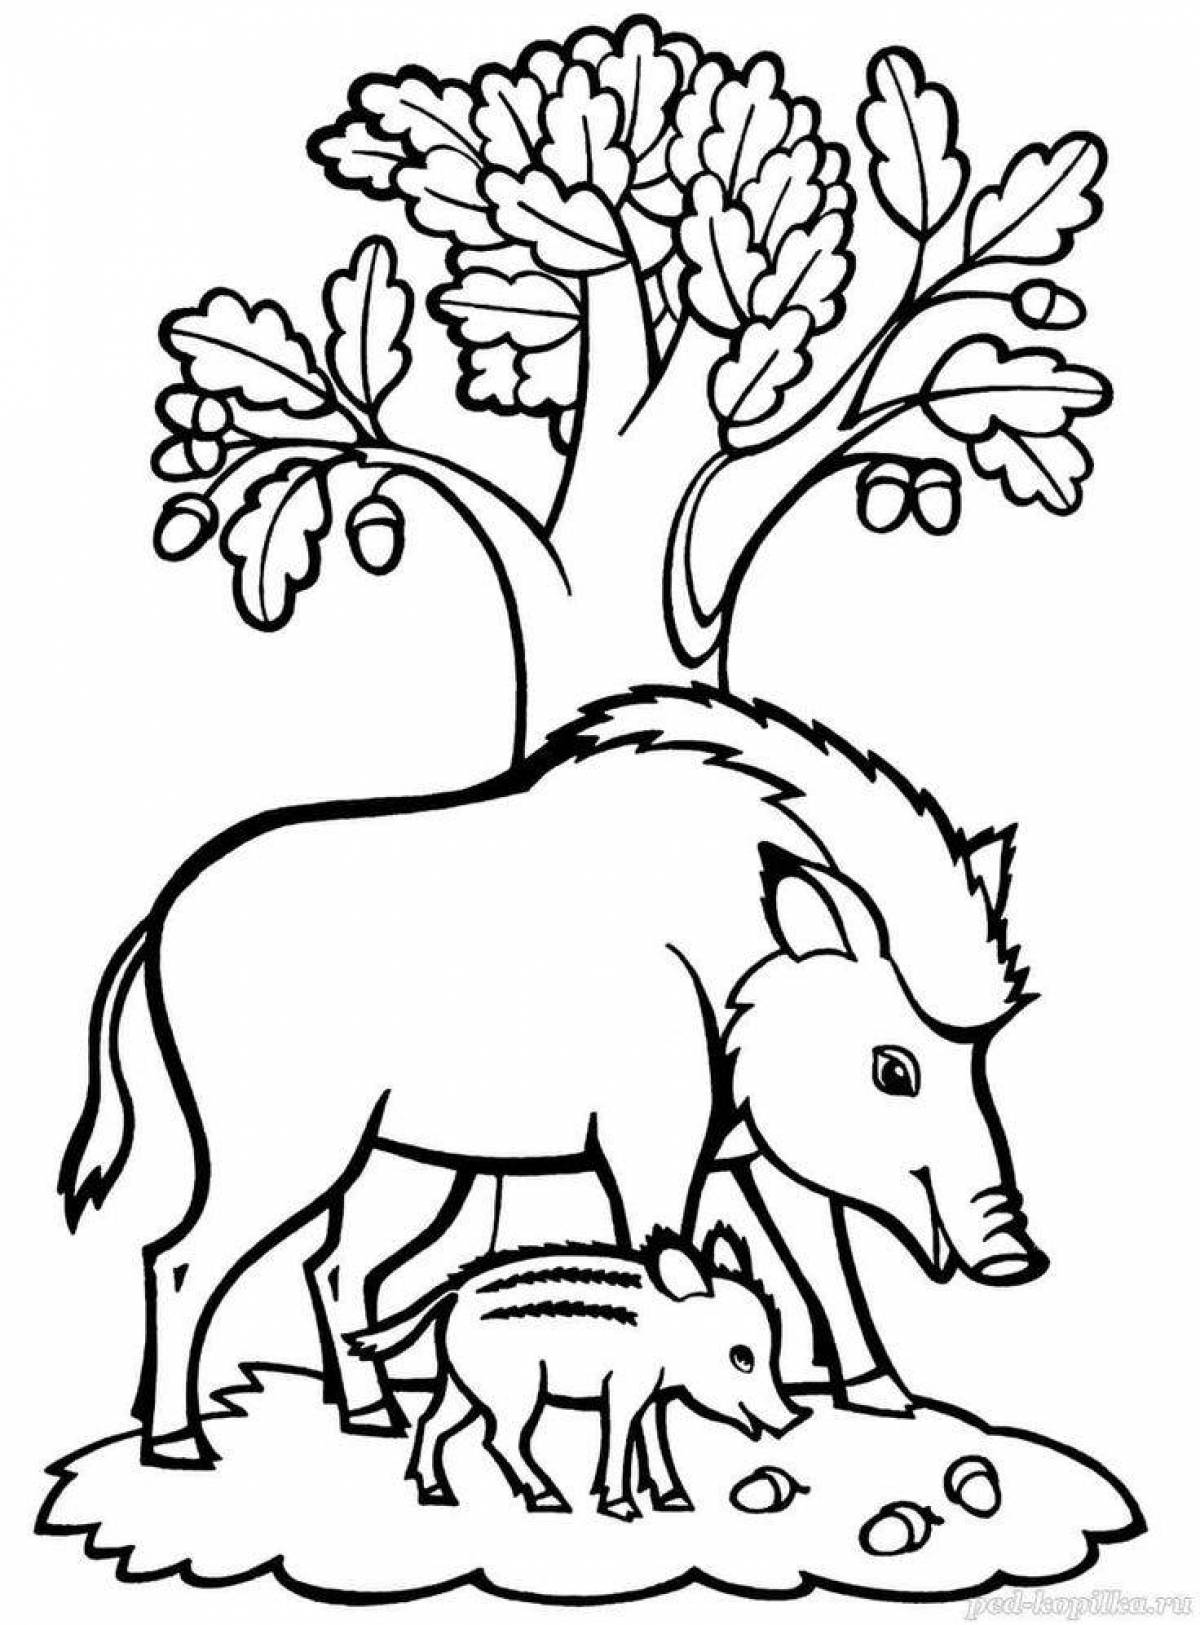 Amazing wild animal coloring pages for 4-5 year olds